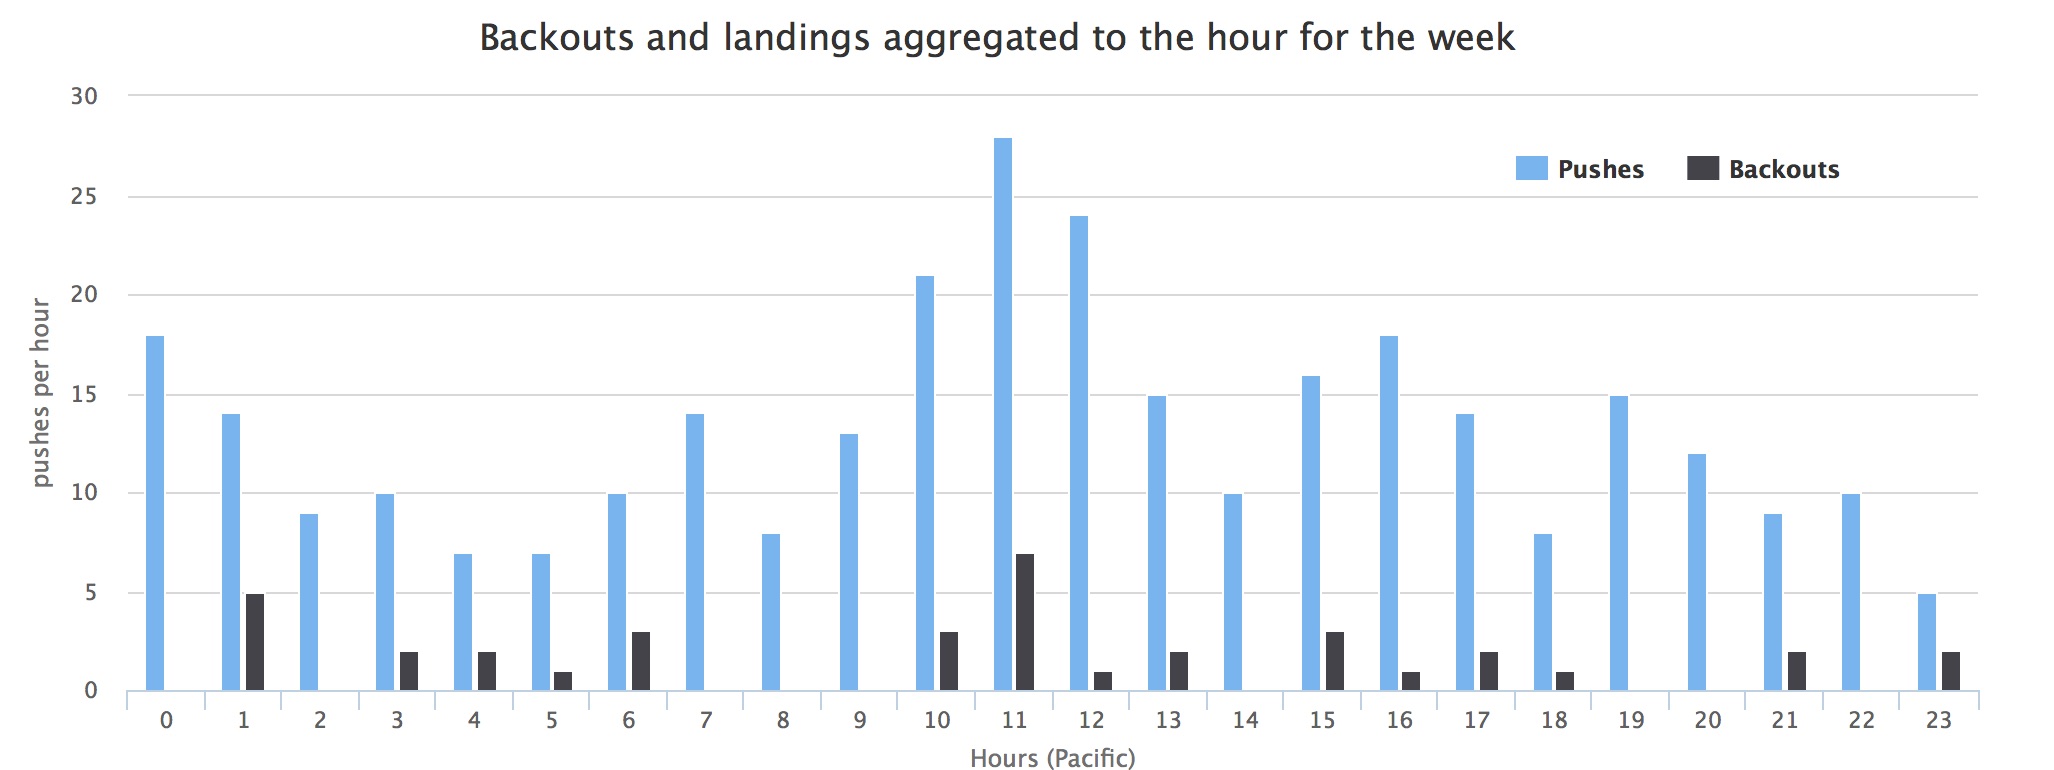 Pushes aggregated per hour for the last hour